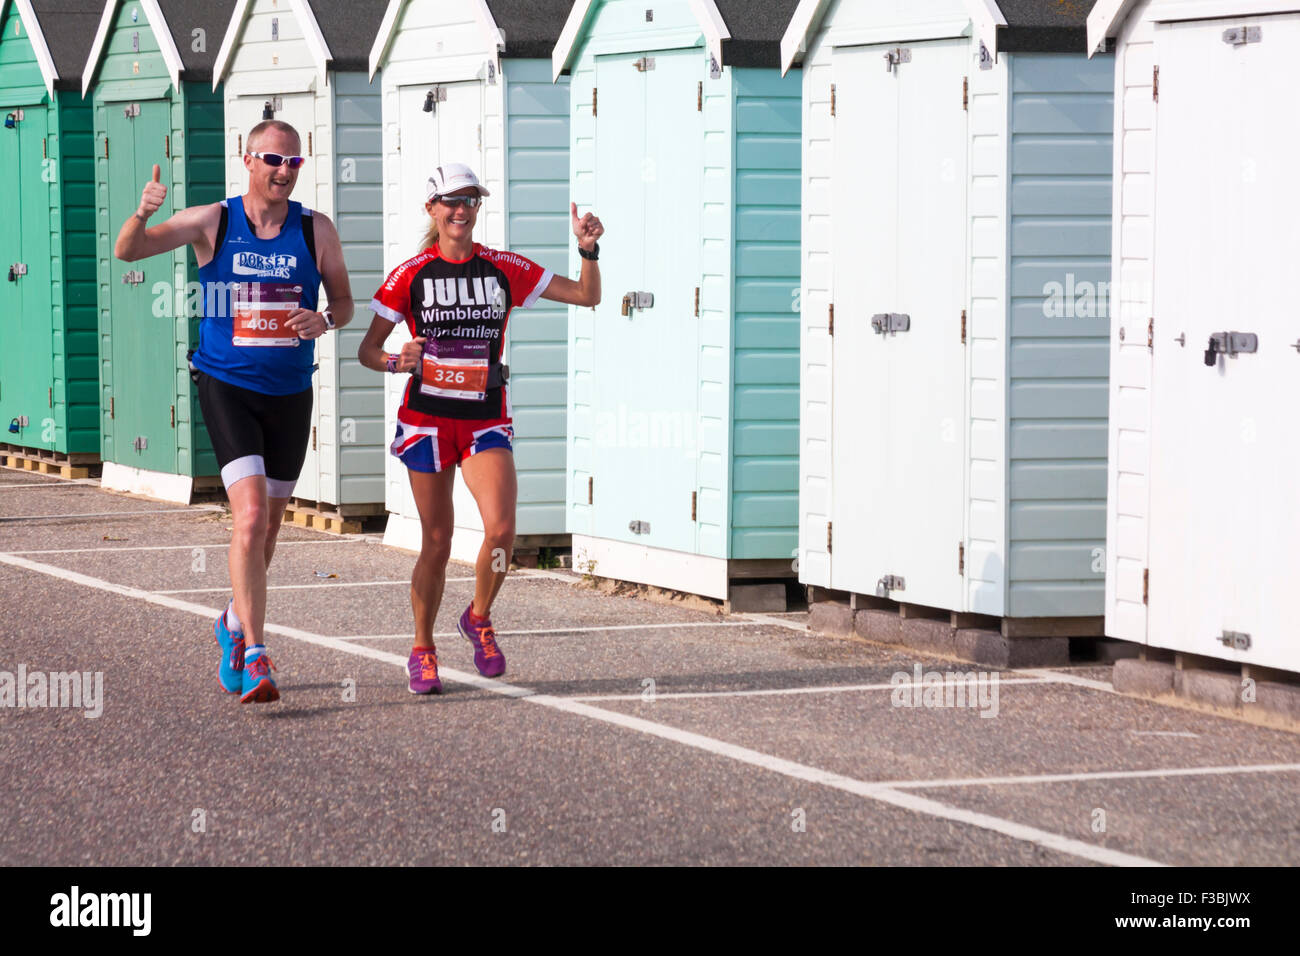 Bournemouth, Dorset, UK. 4 October 2015. Over 11000 people take part in the Bournemouth Marathon Festival over the weekend. The second day sees the full marathon and half marathon. Marathon participants Credit:  Carolyn Jenkins/Alamy Live News Stock Photo